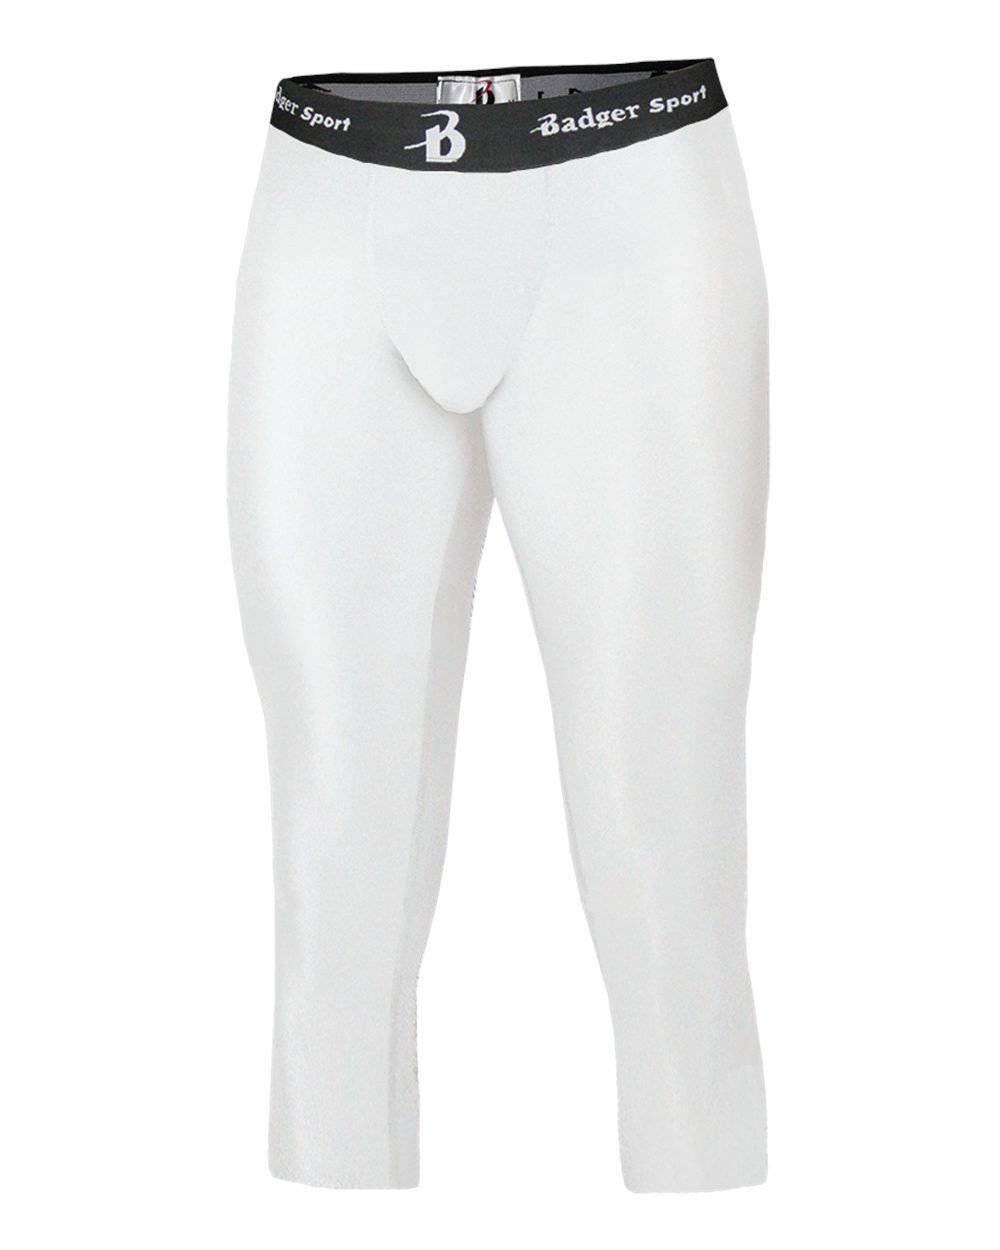 Badger Sport 4611 Calf Length Compression Tight - White - HIT a Double - 1